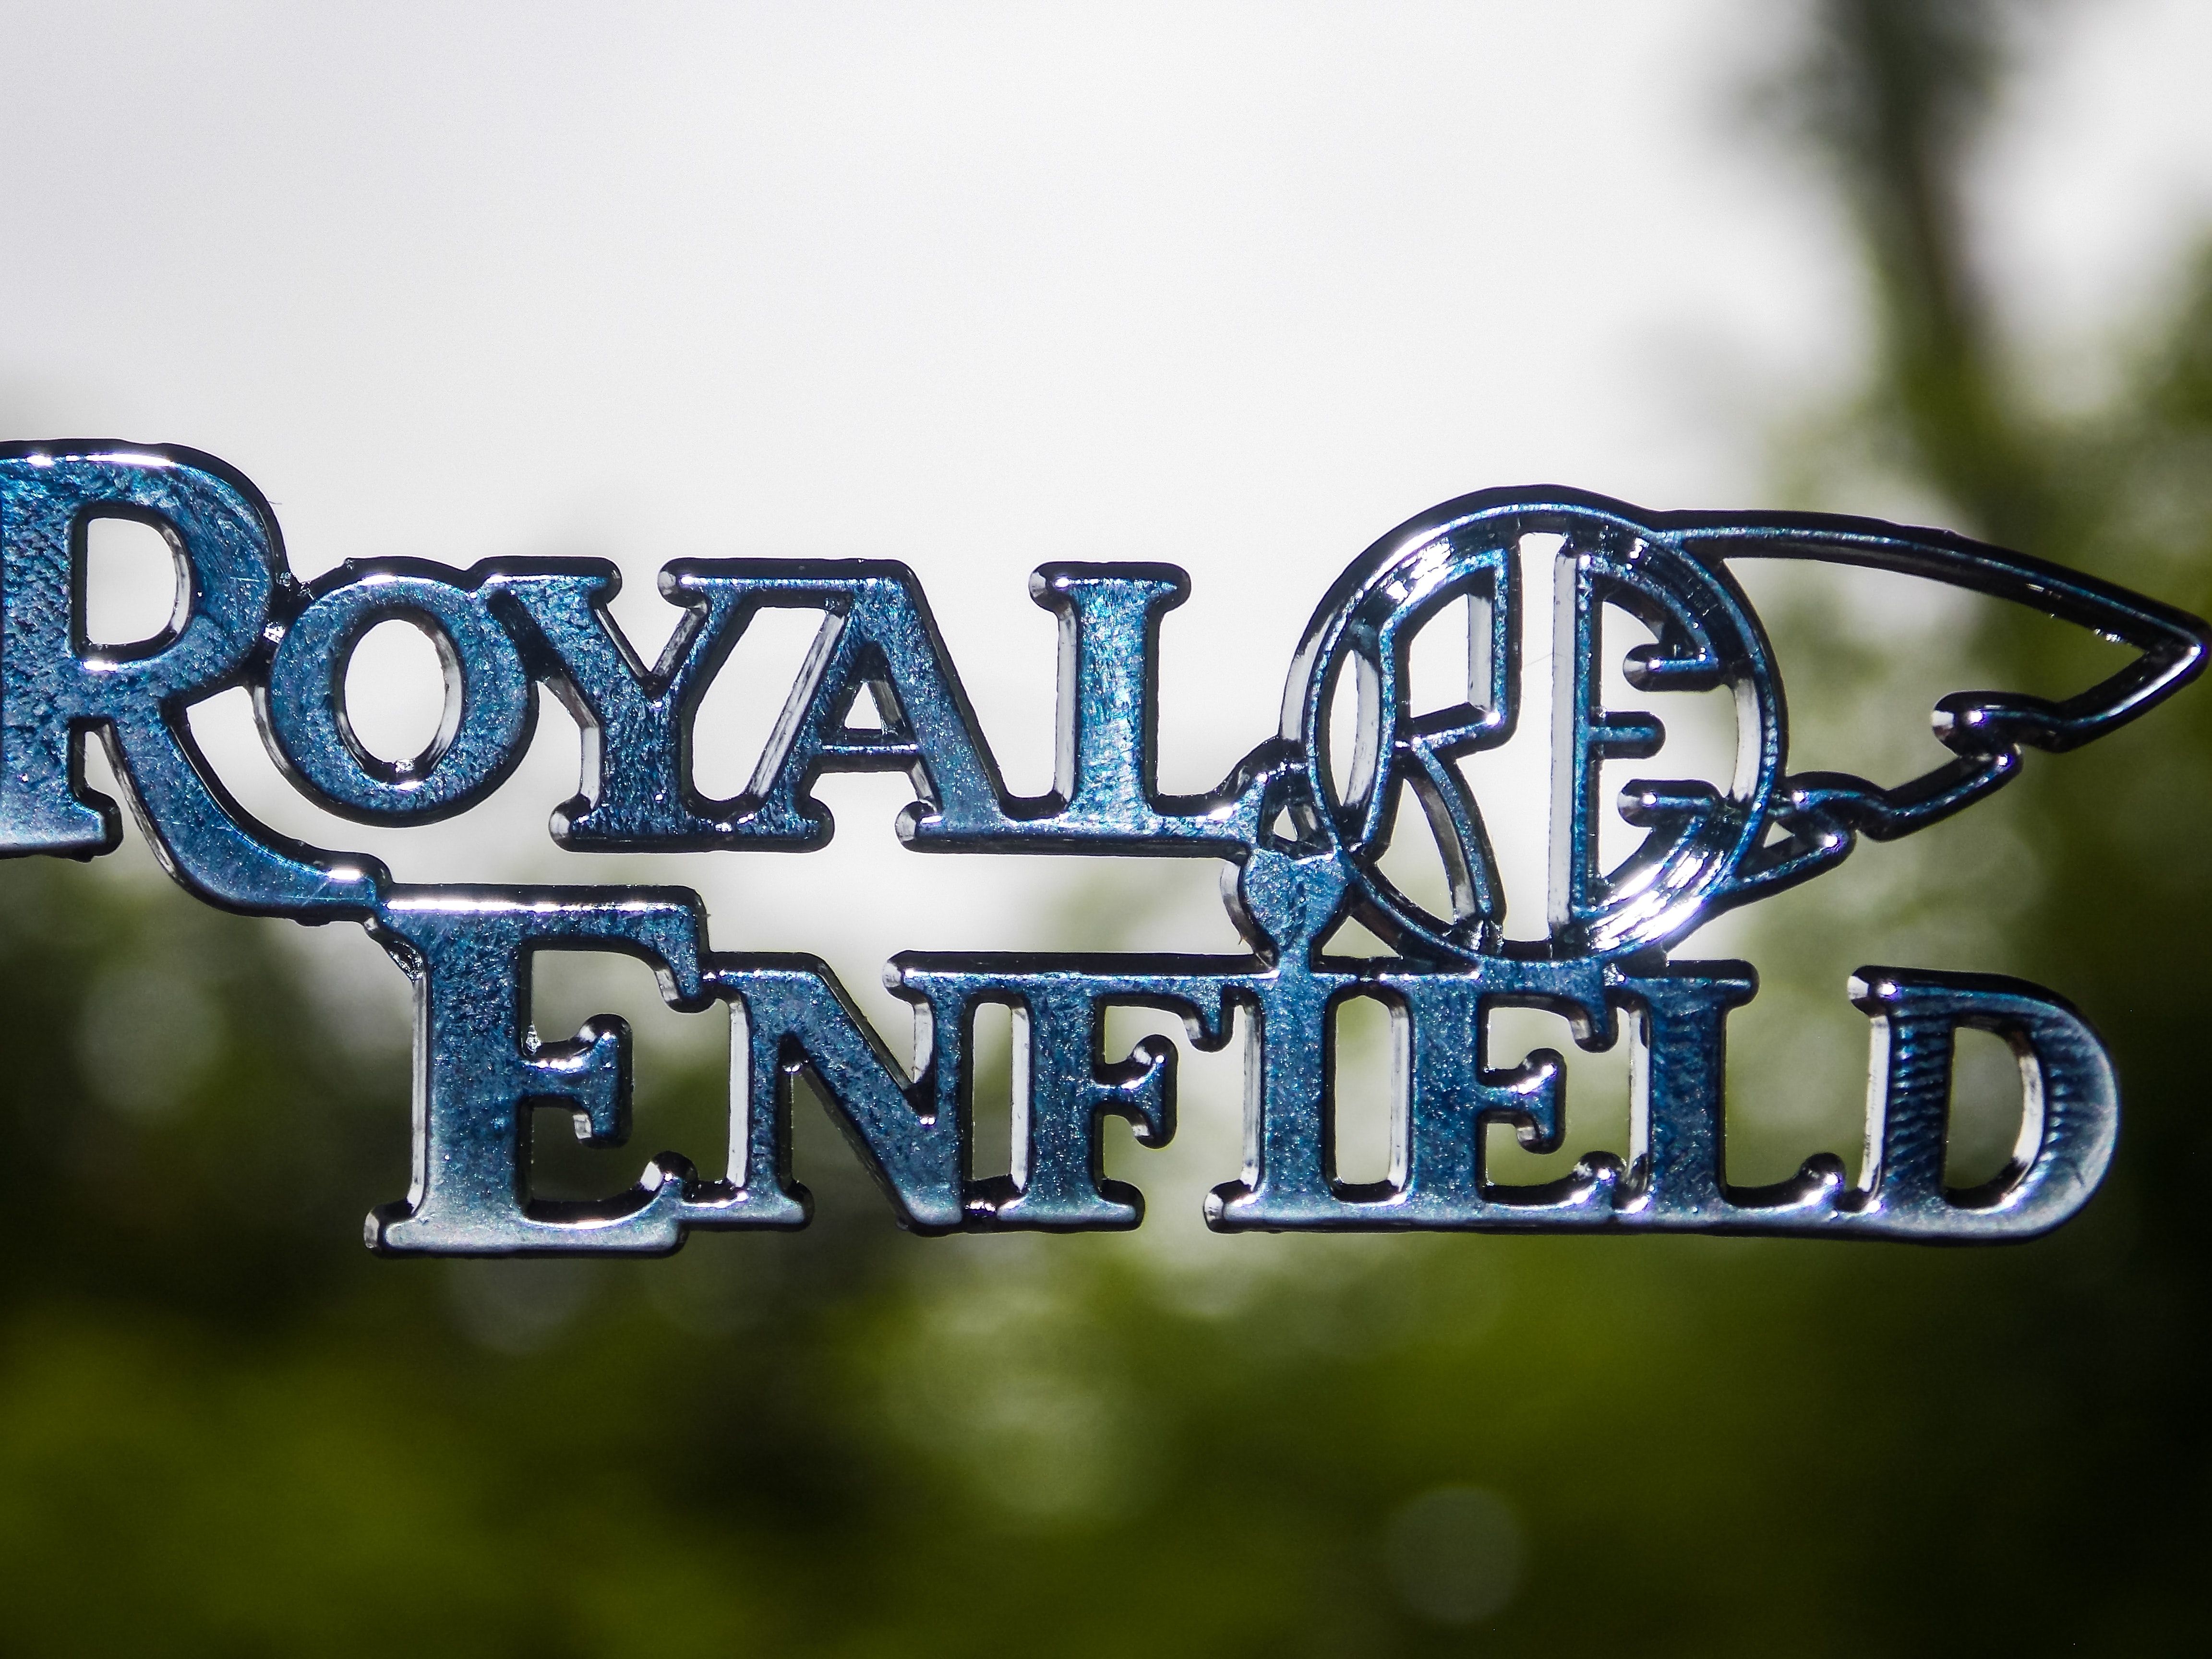 Royal Enfield Logo Wallpapers - Rev Up Your Screens with Stunning ...